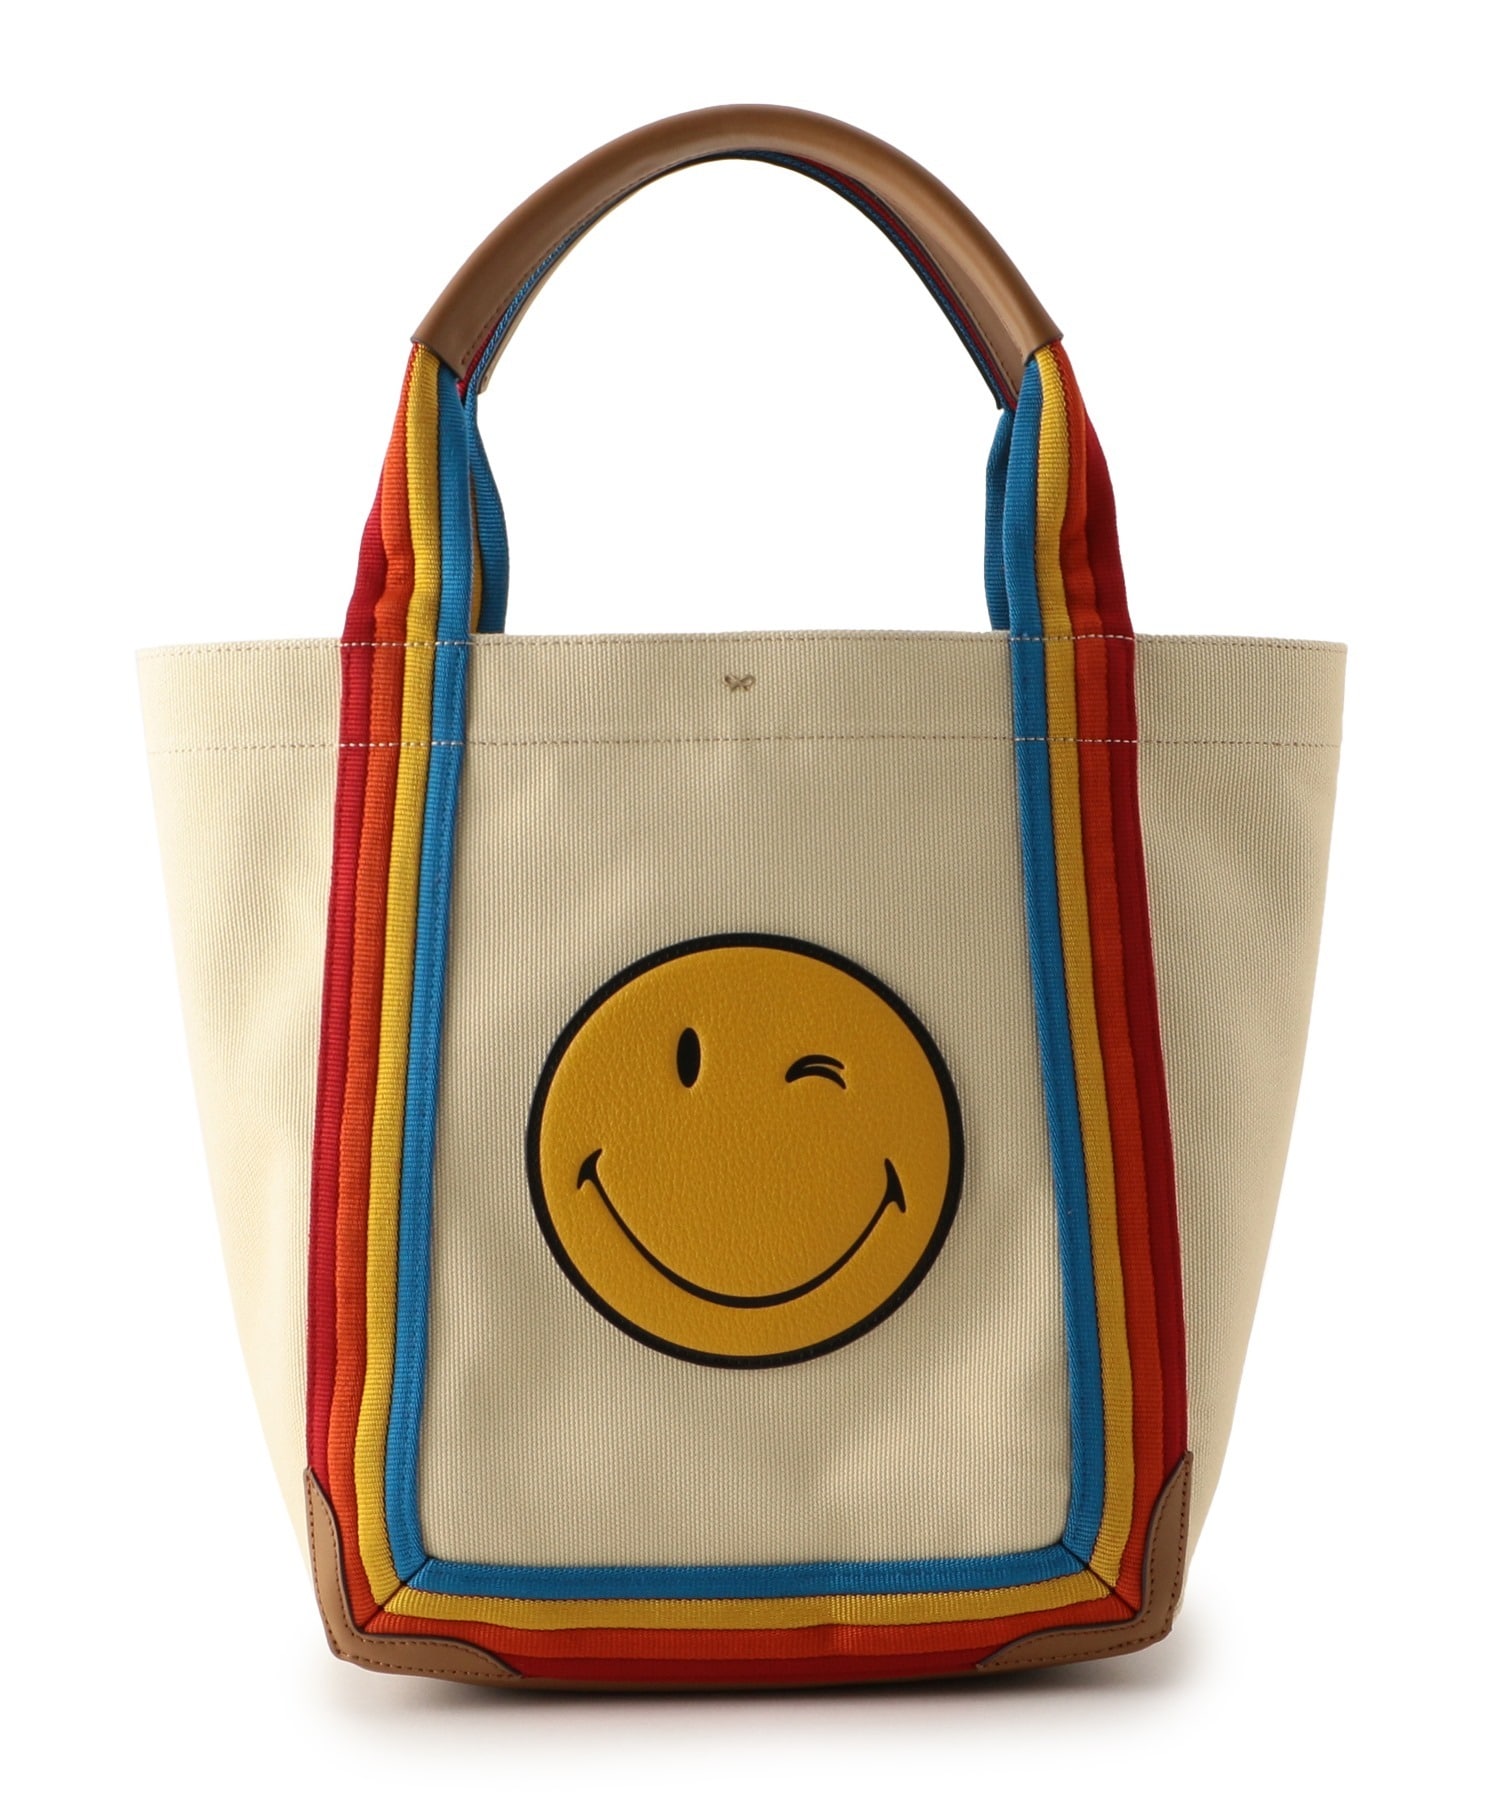 "Pont Tote Small Printed Wink" トートバッグ 詳細画像 ホワイト 1